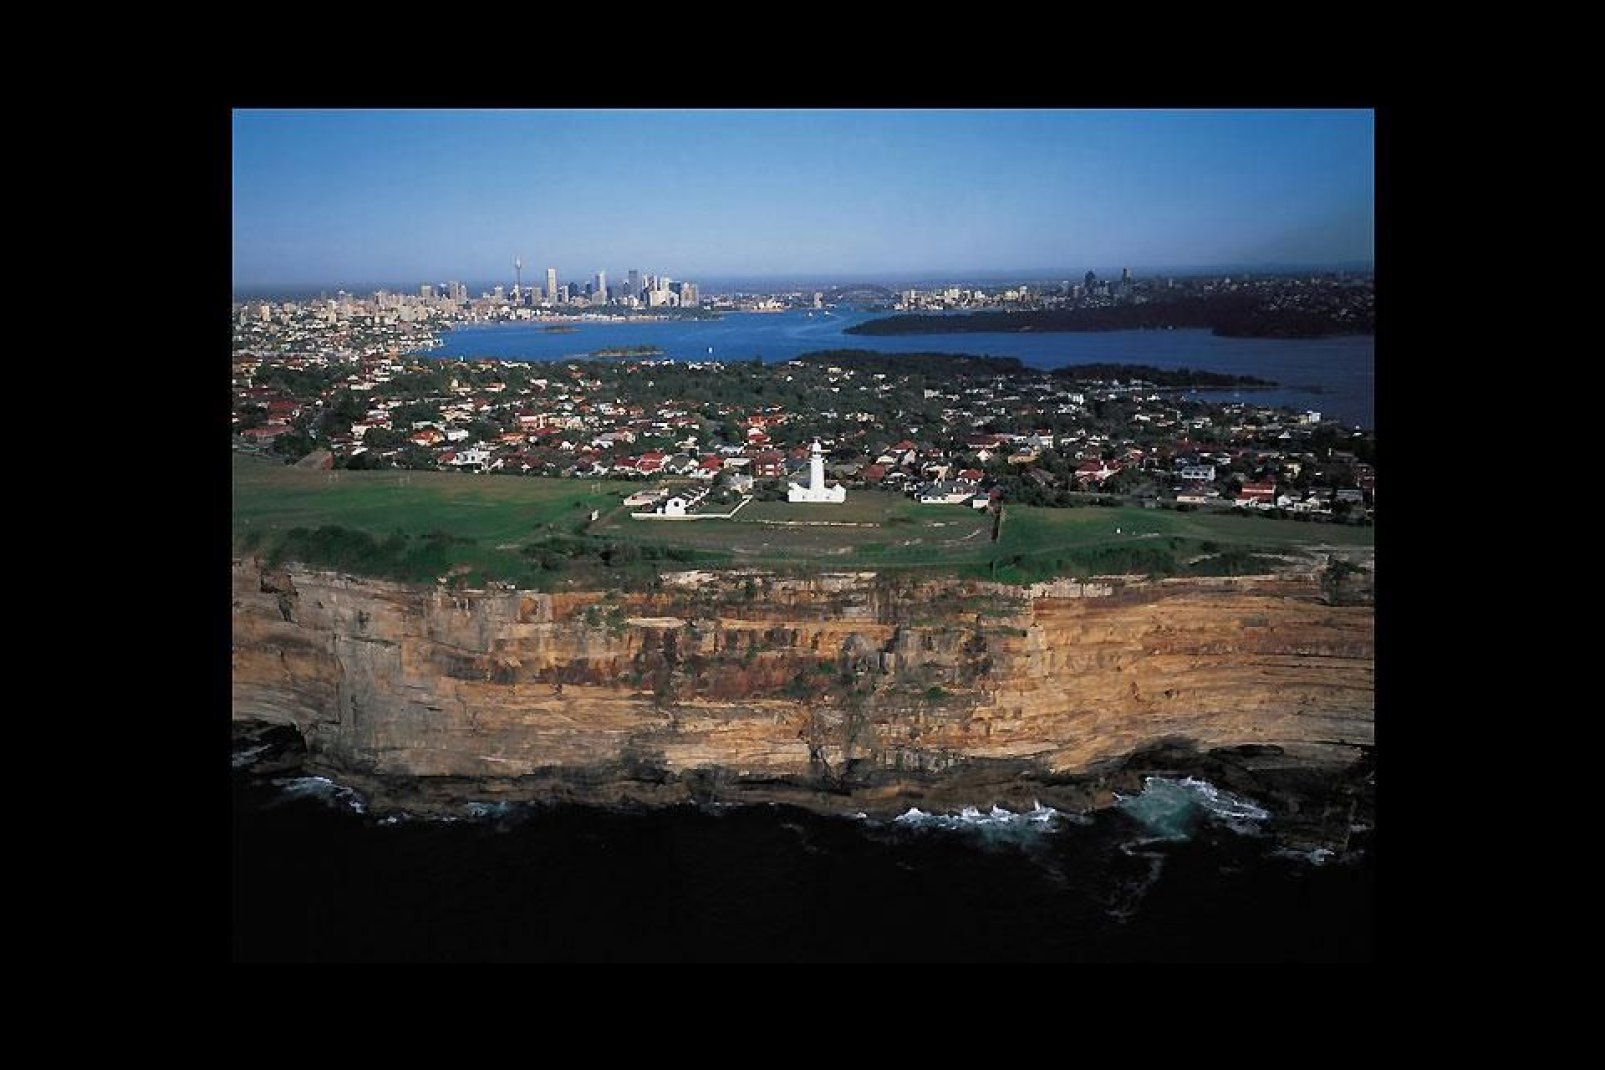 Sydney brings together two regions: the Cumberland Plain and the Hornsby Plateau.